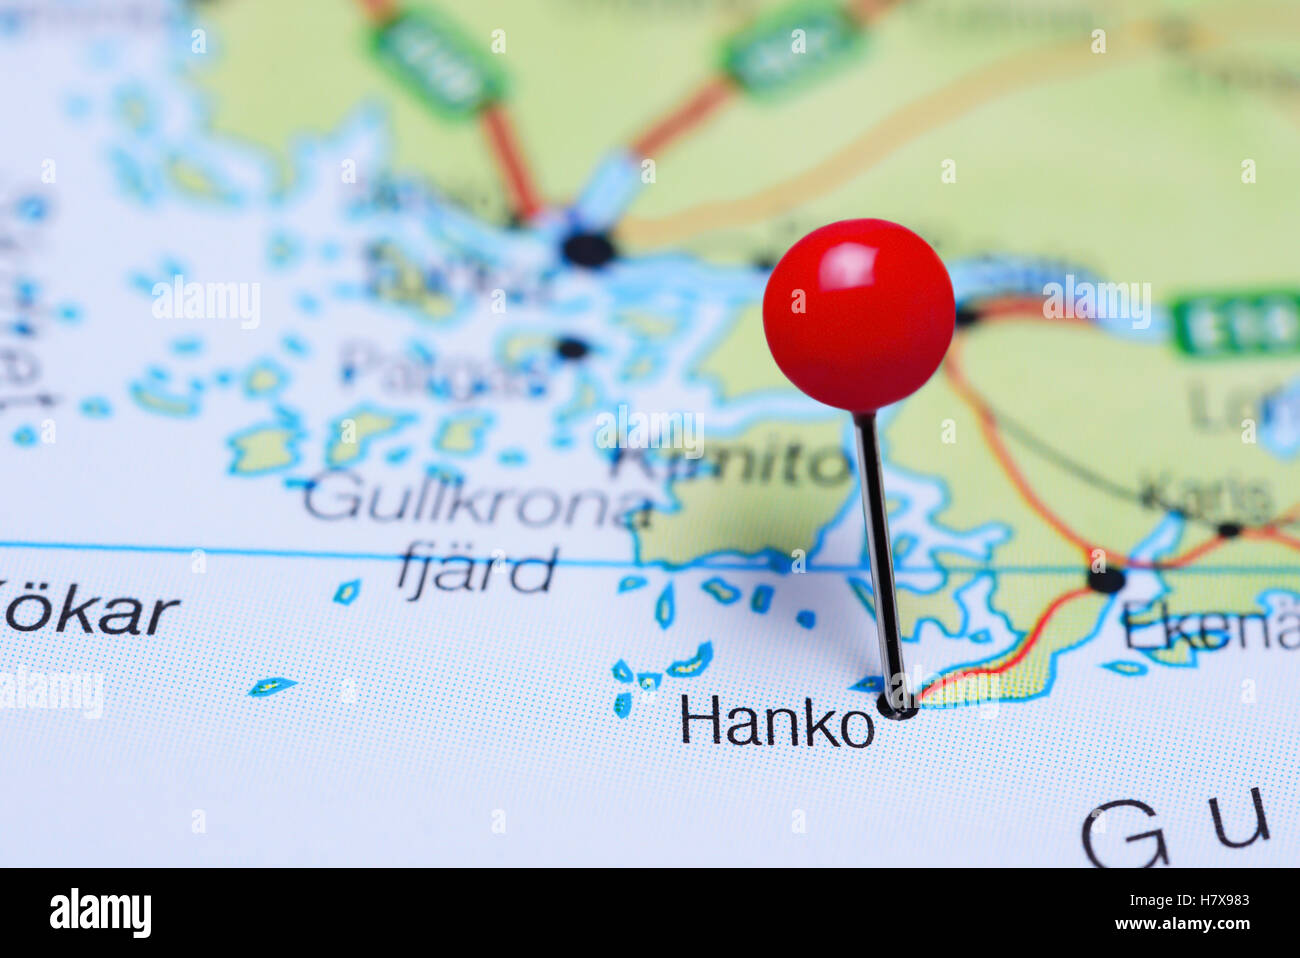 Hanko pinned on a map of Finland Stock Photo